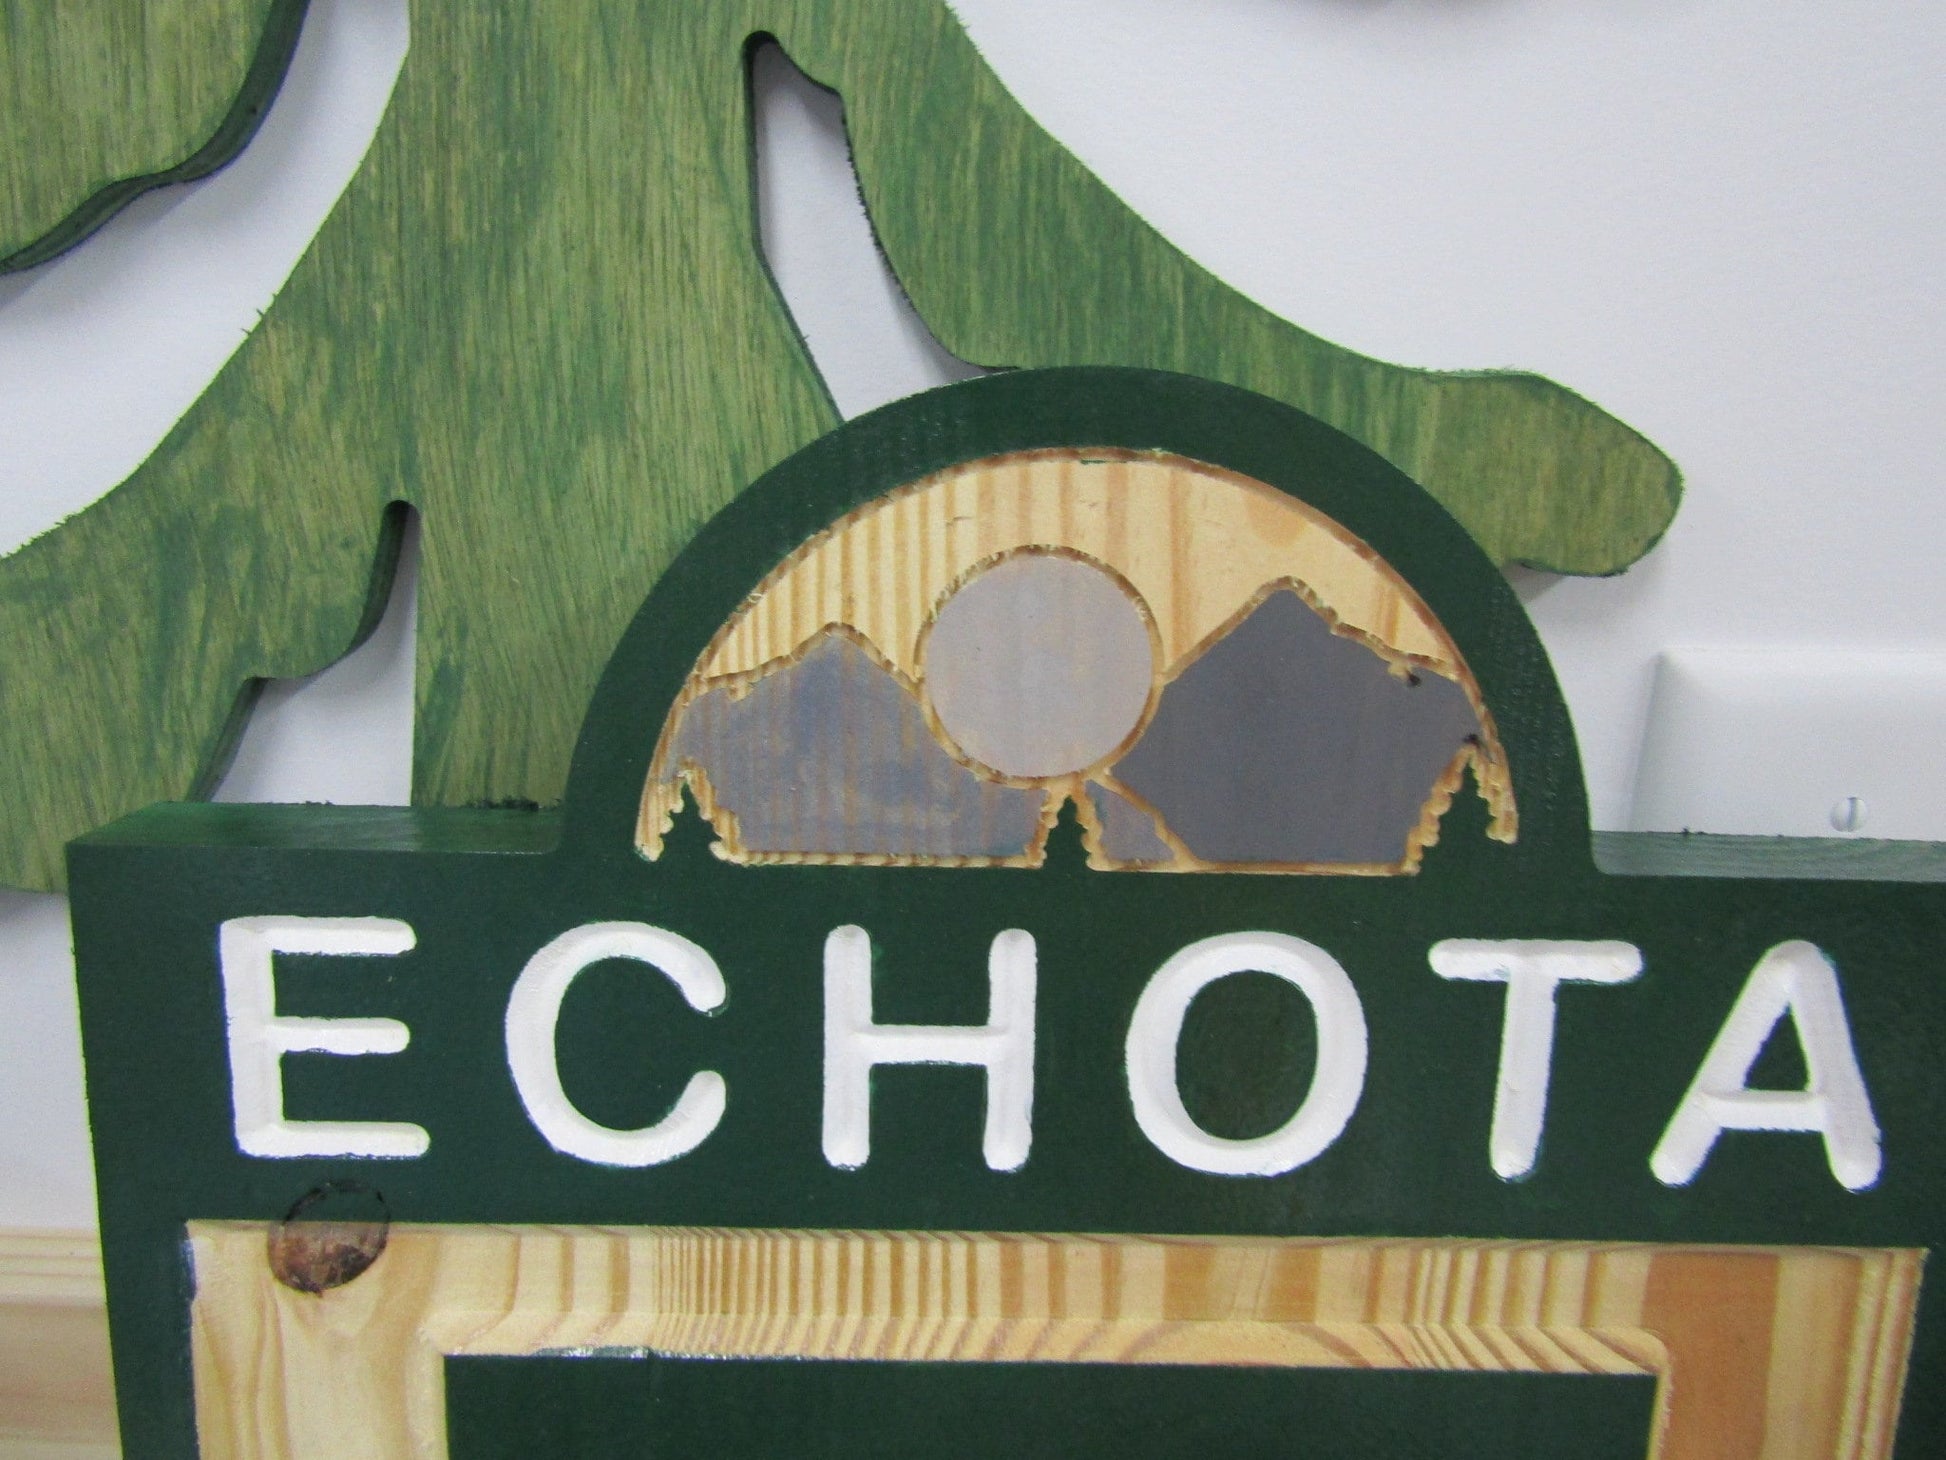 Route Echota Contour Engraved Routed Sign Commerical Real Estate Vacation Wilderness Outdoors Handmade Sign Inscribed